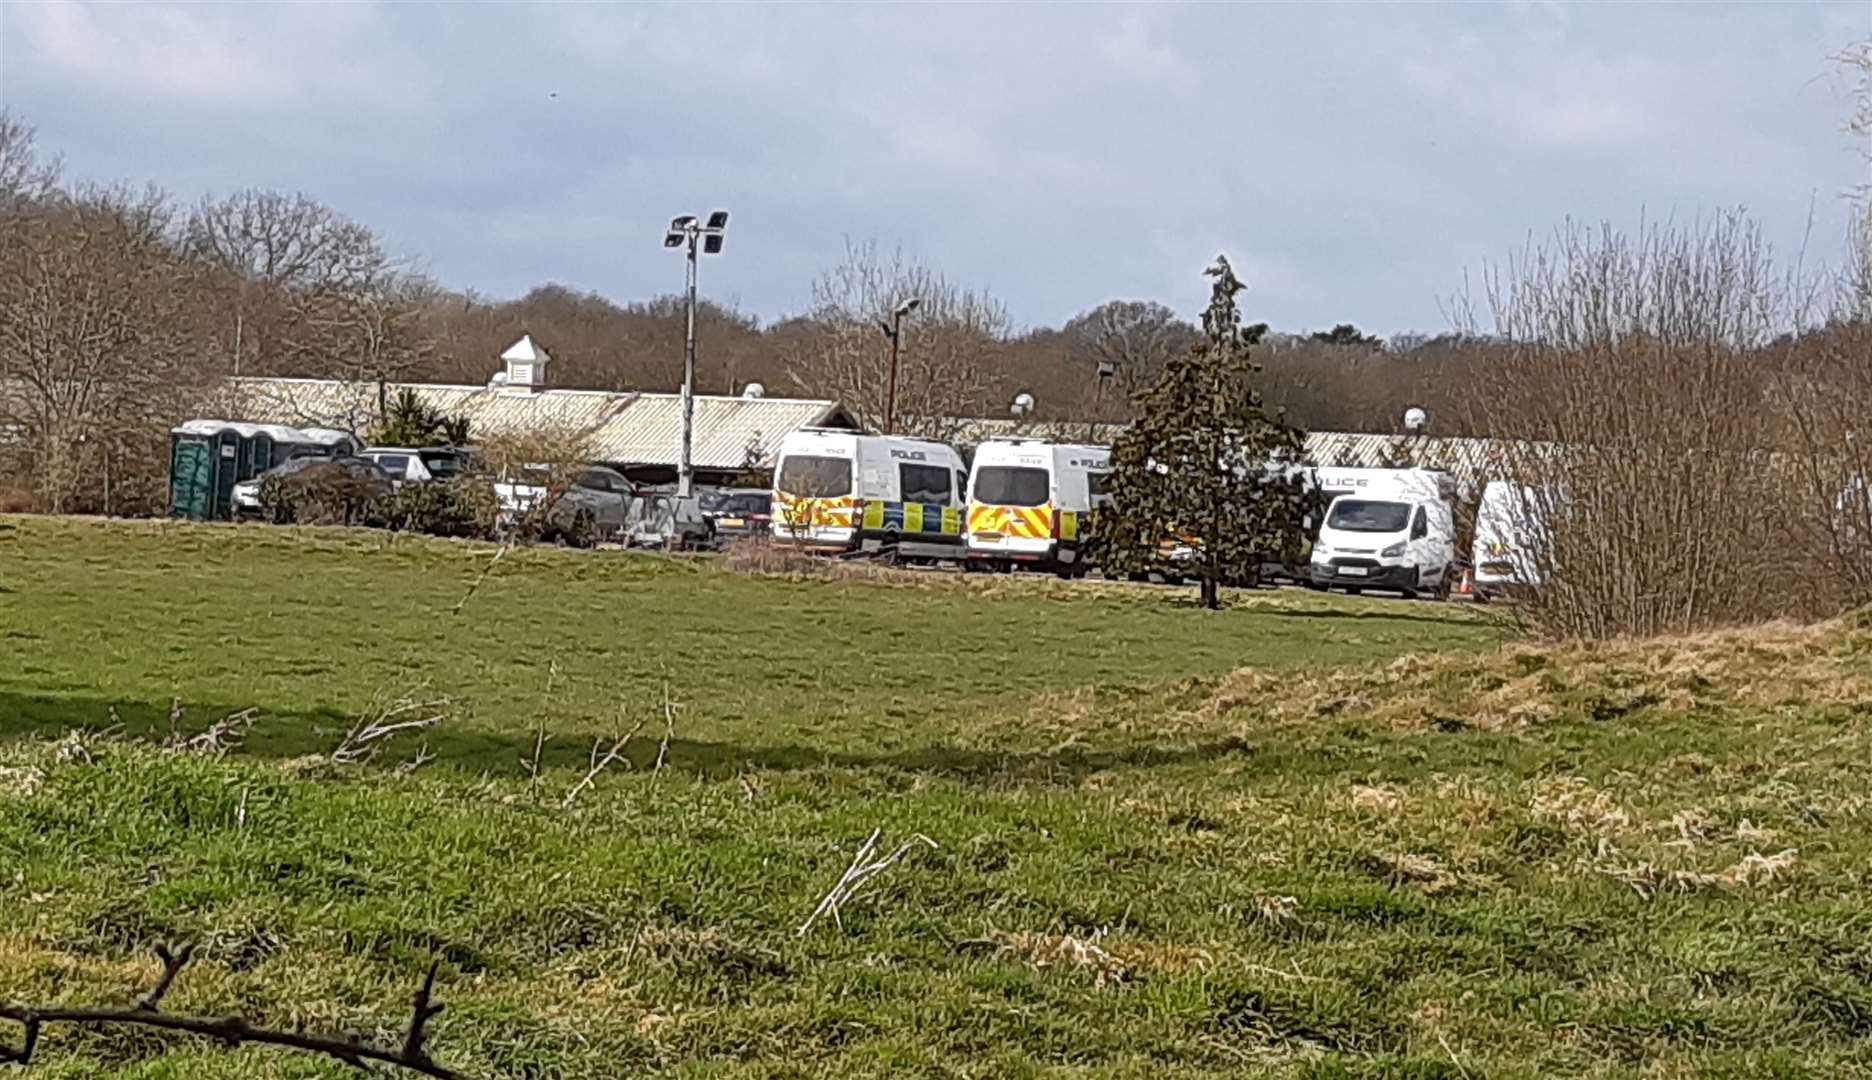 Police vehicles parked on the former car park on Thursday morning